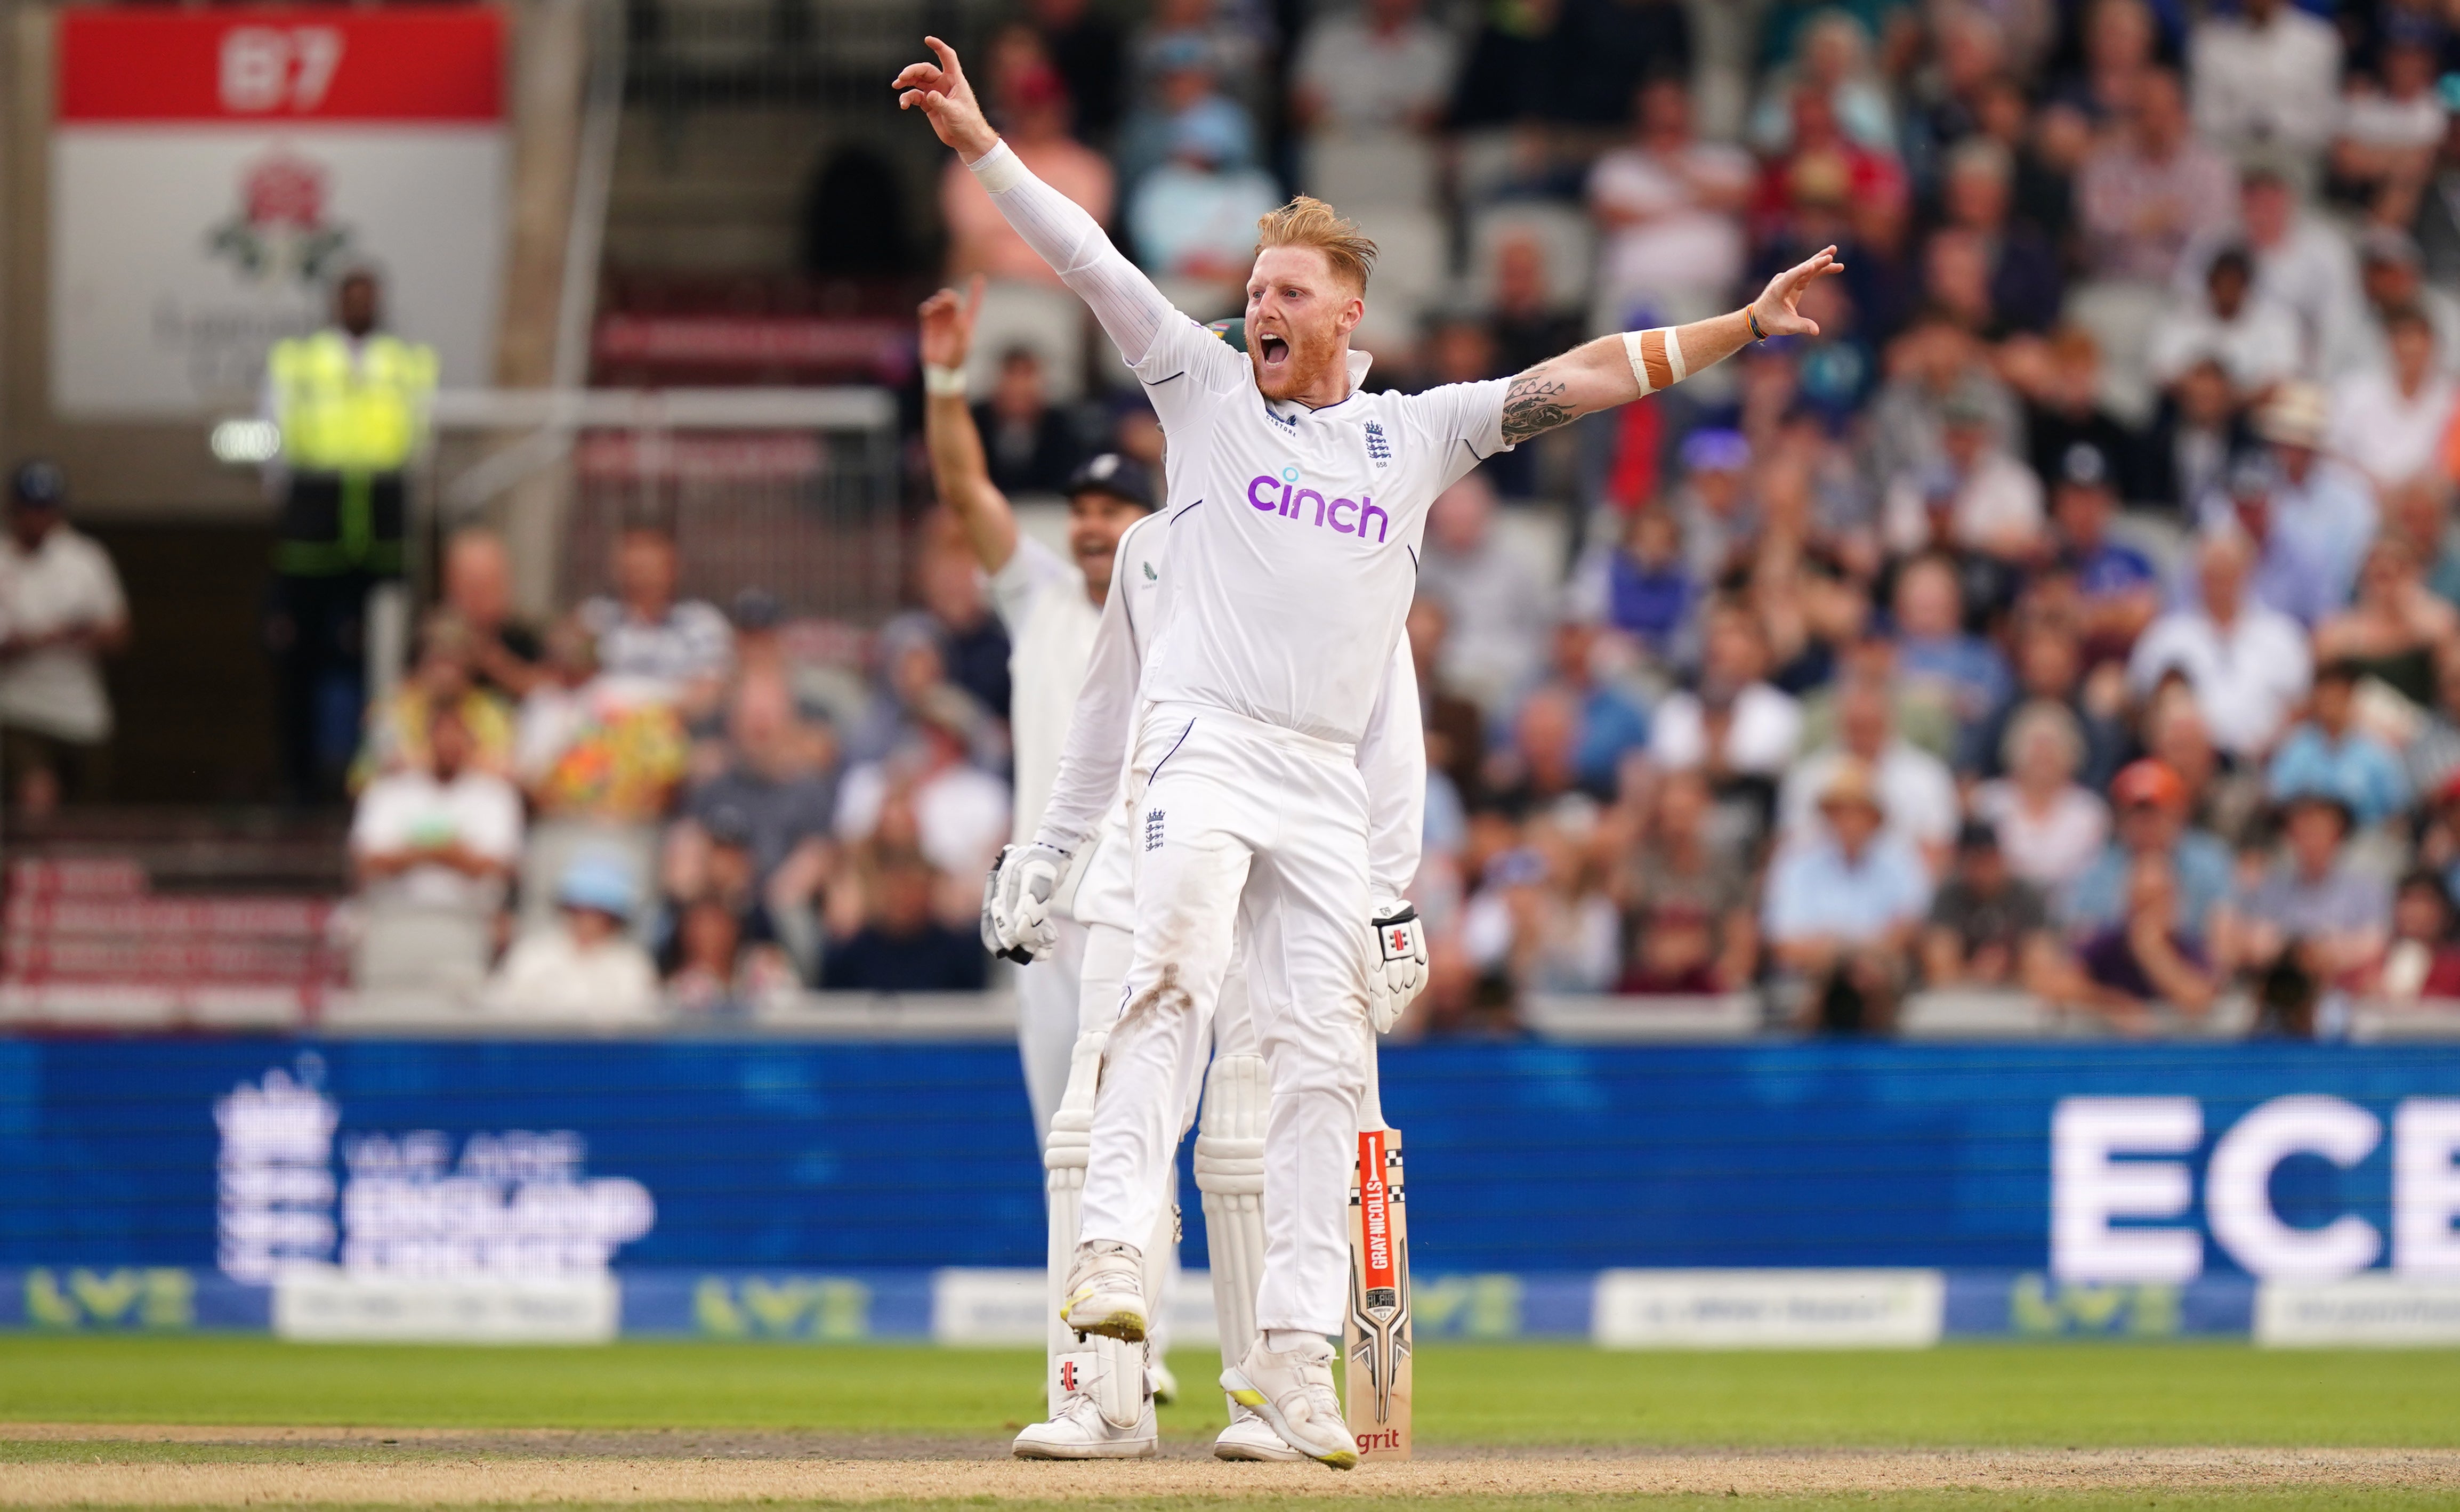 Ben Stokes has led from the front this summer as England men’s skipper